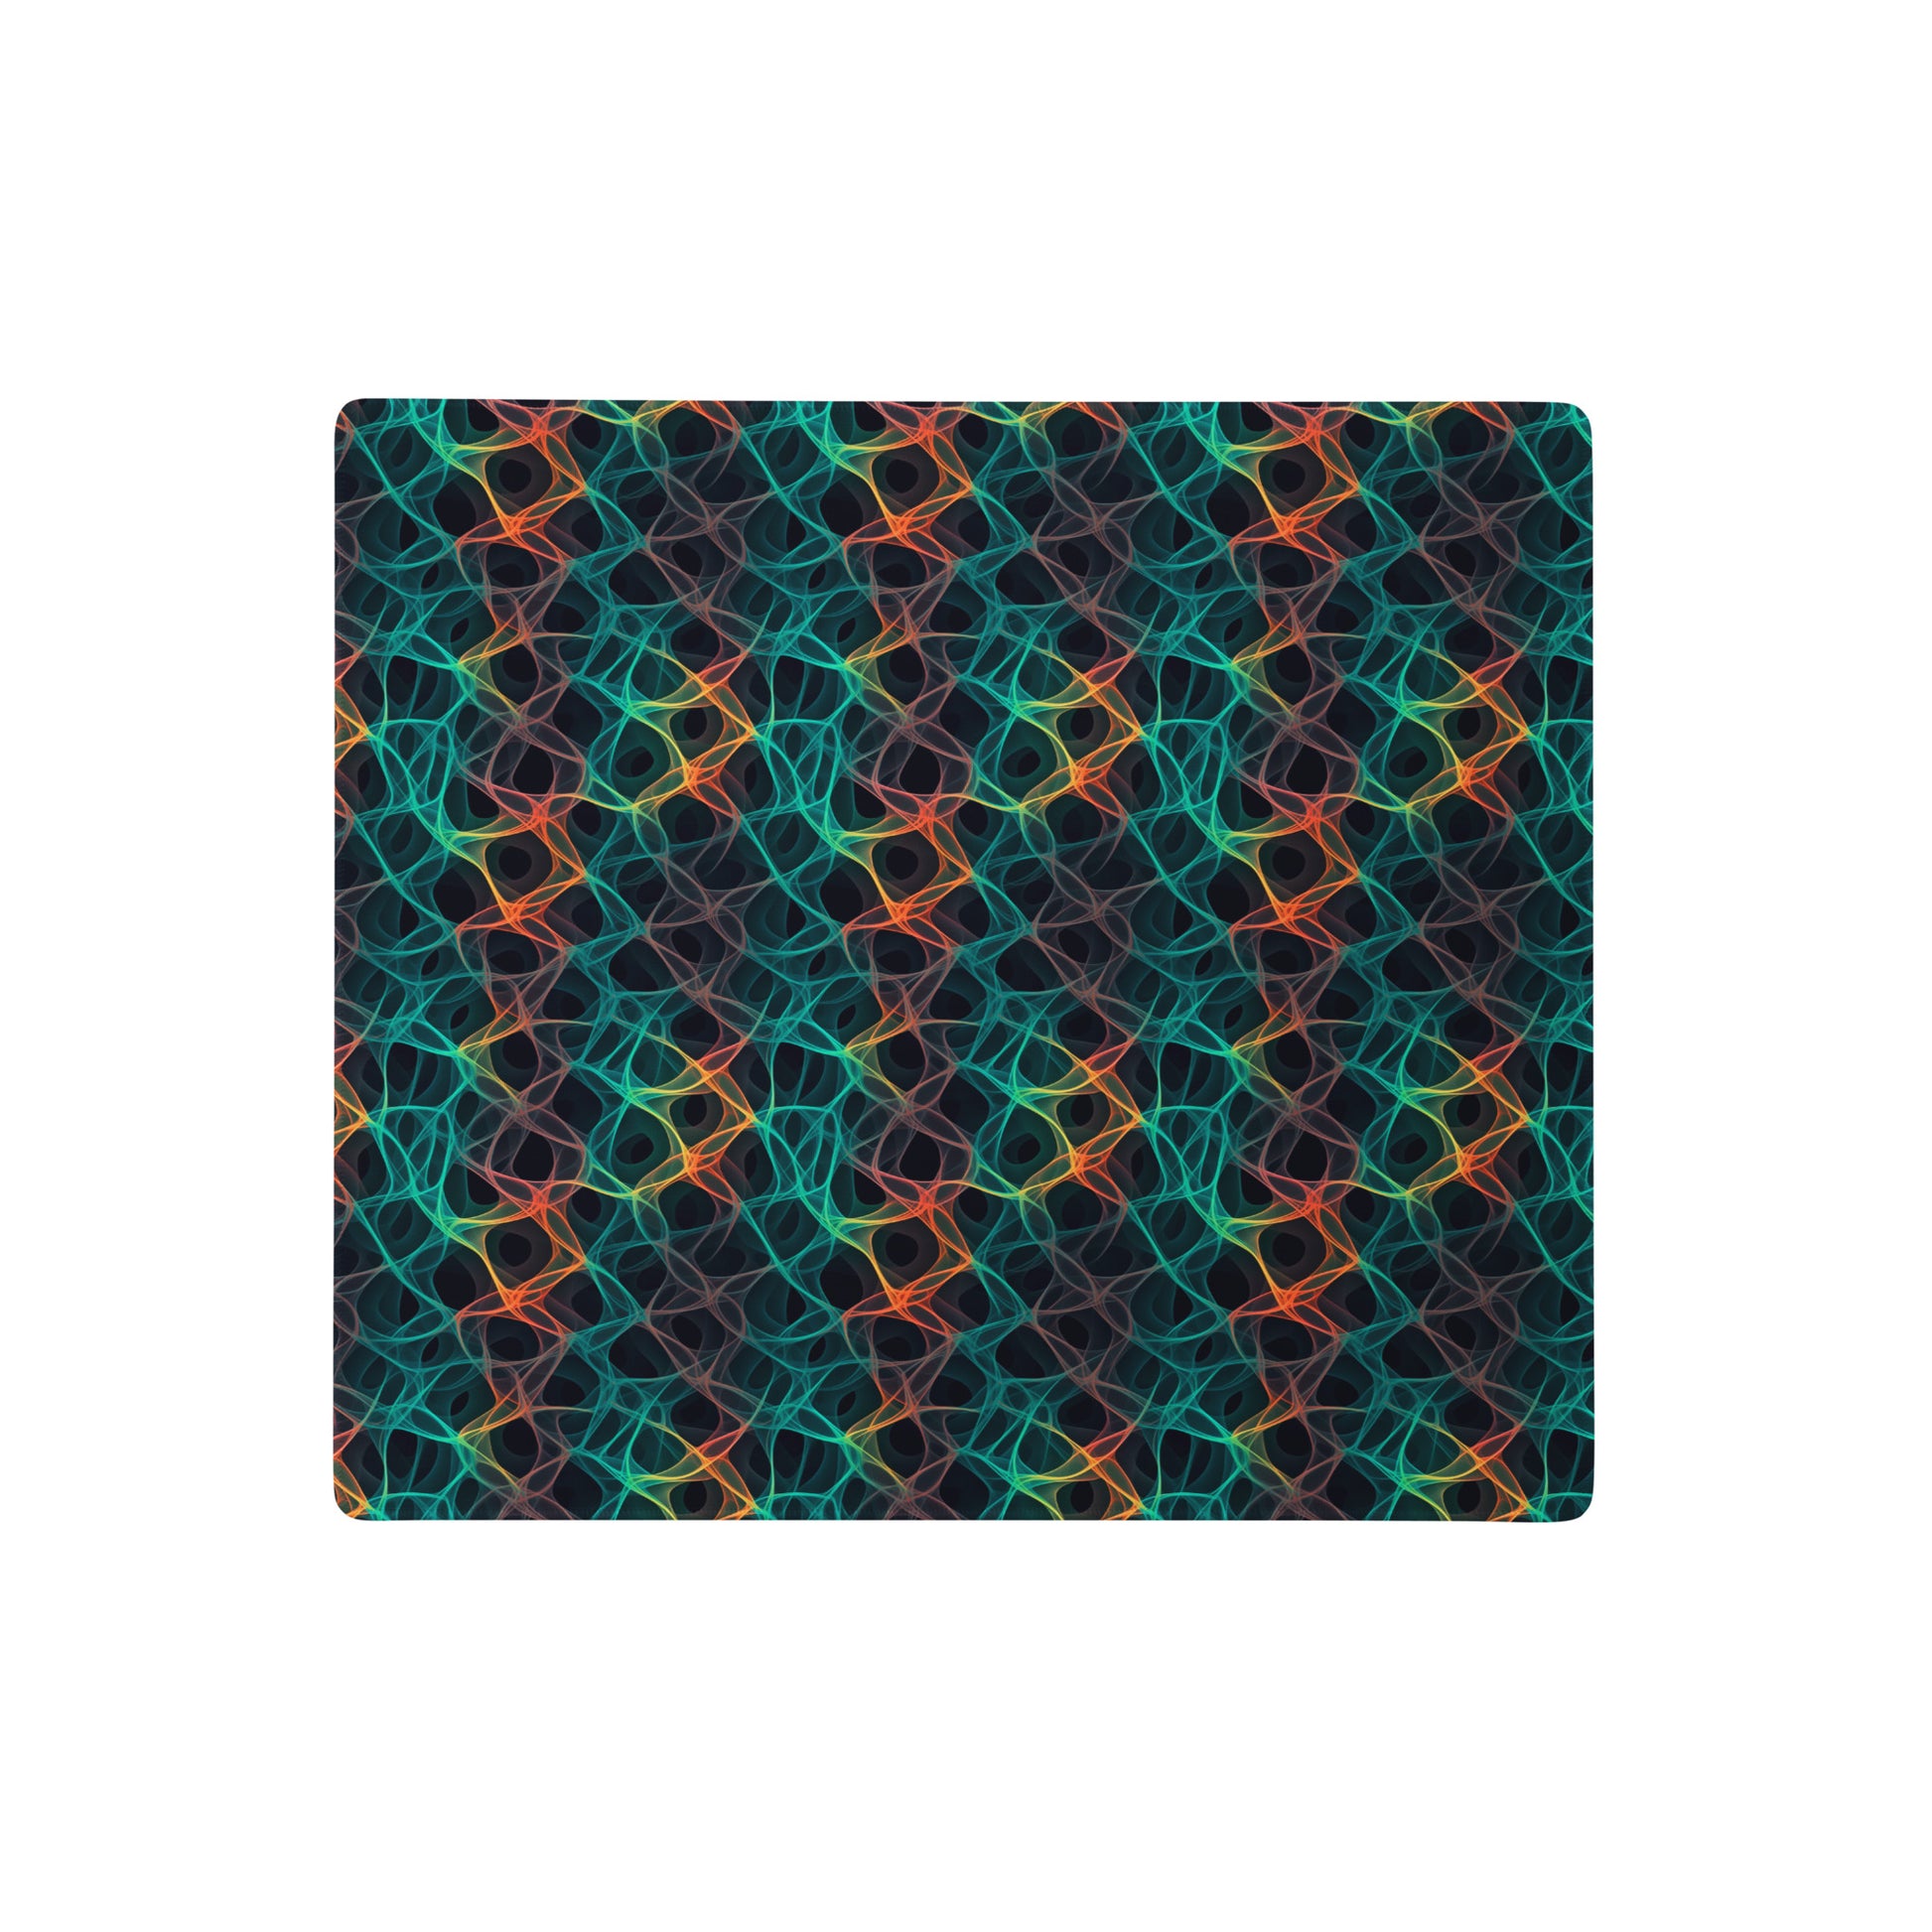 A 18" x 16" desk pad with an abstract pattern resembling a cell structure on it. Rainbow in color.